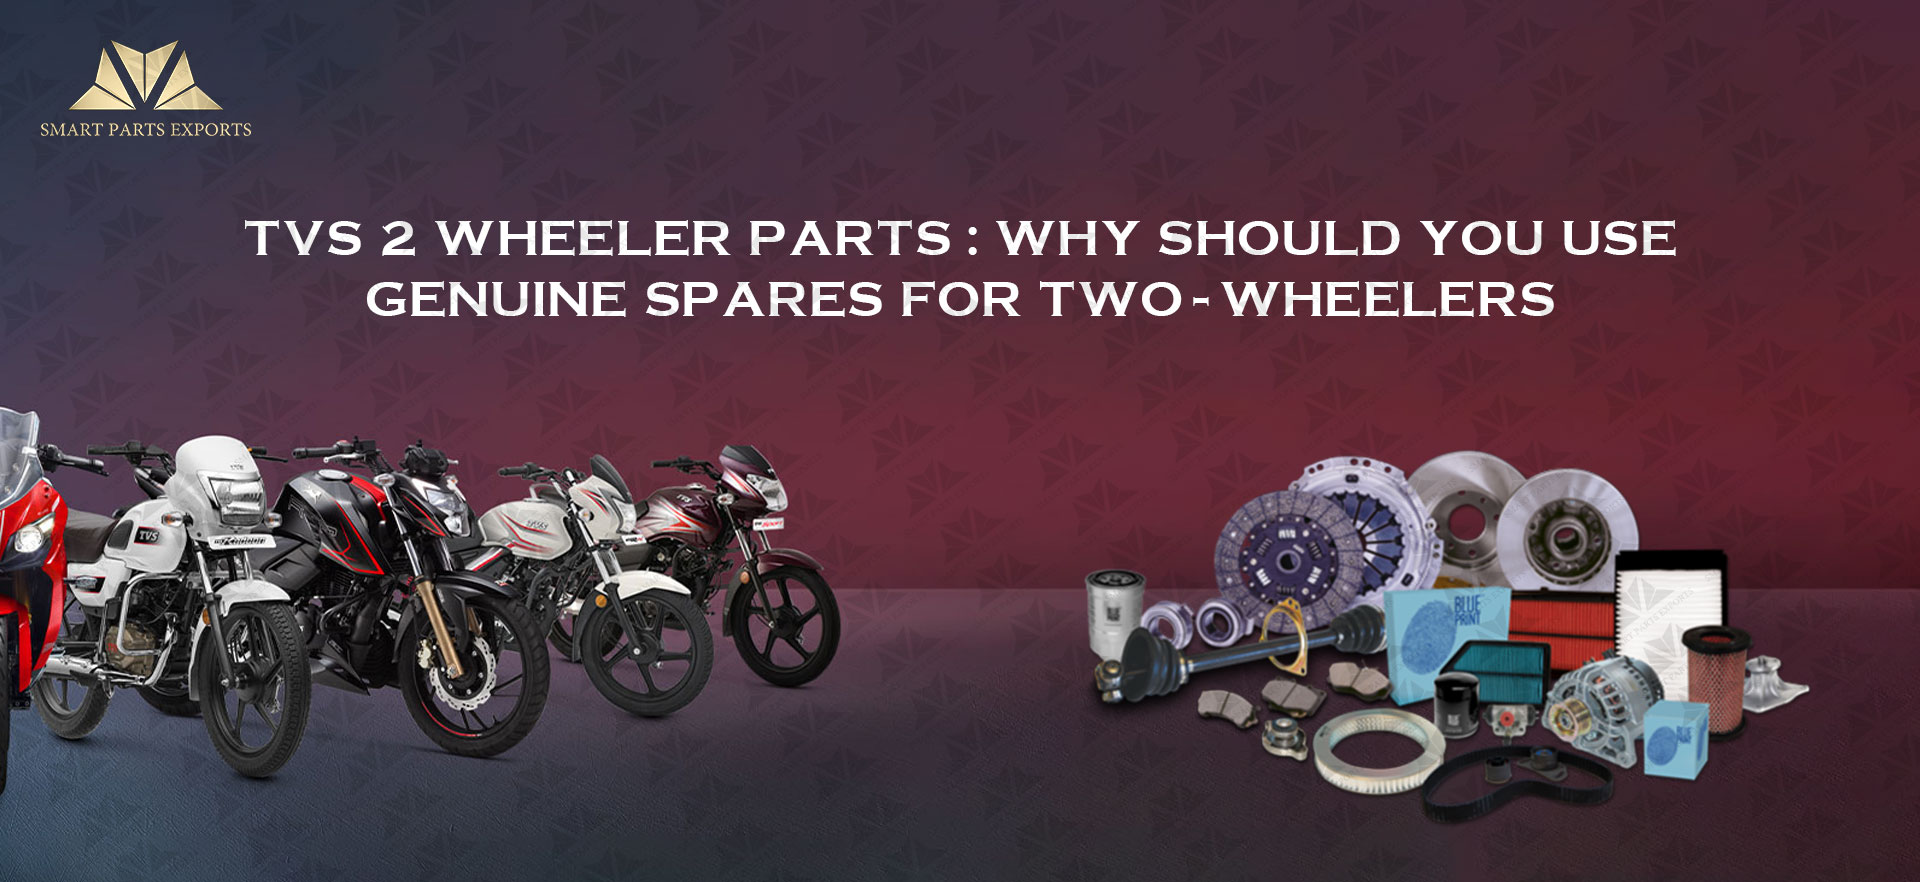 TVS 2 Wheeler Parts: Why Should You Use Genuine Spares for Two-Wheelers